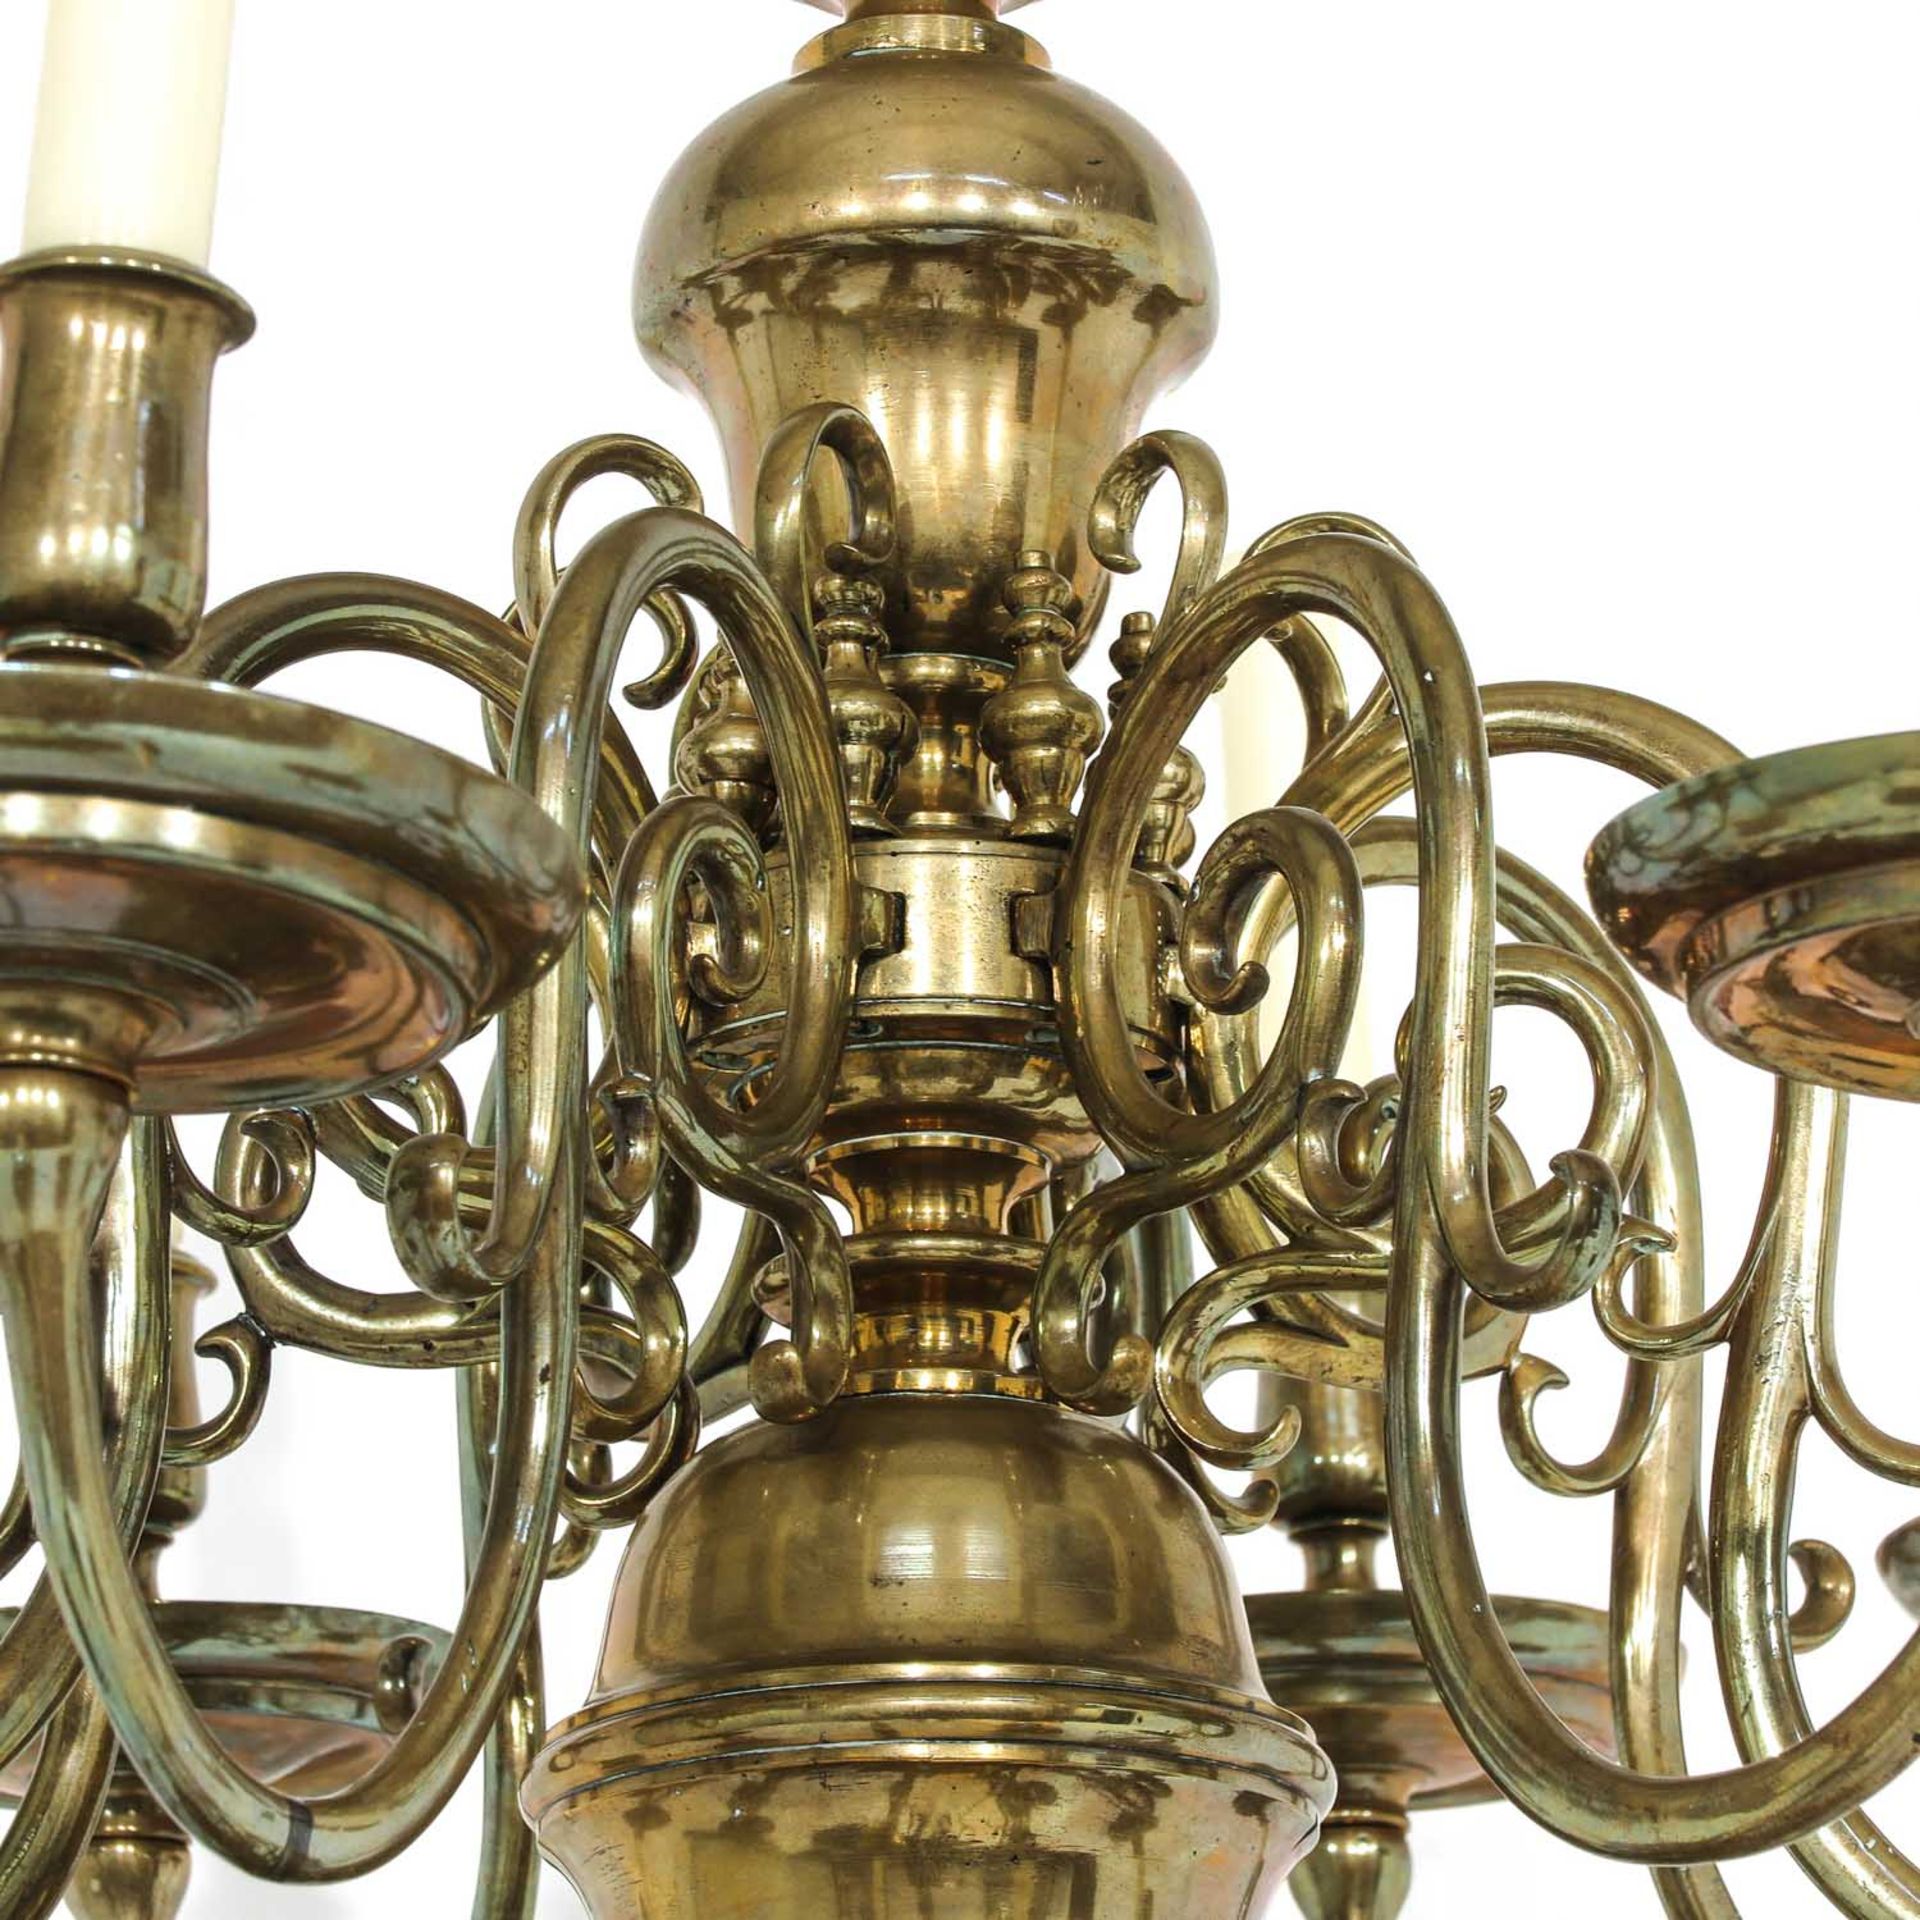 A Rare Example of a Renaissance Period Chandelier - Image 5 of 8